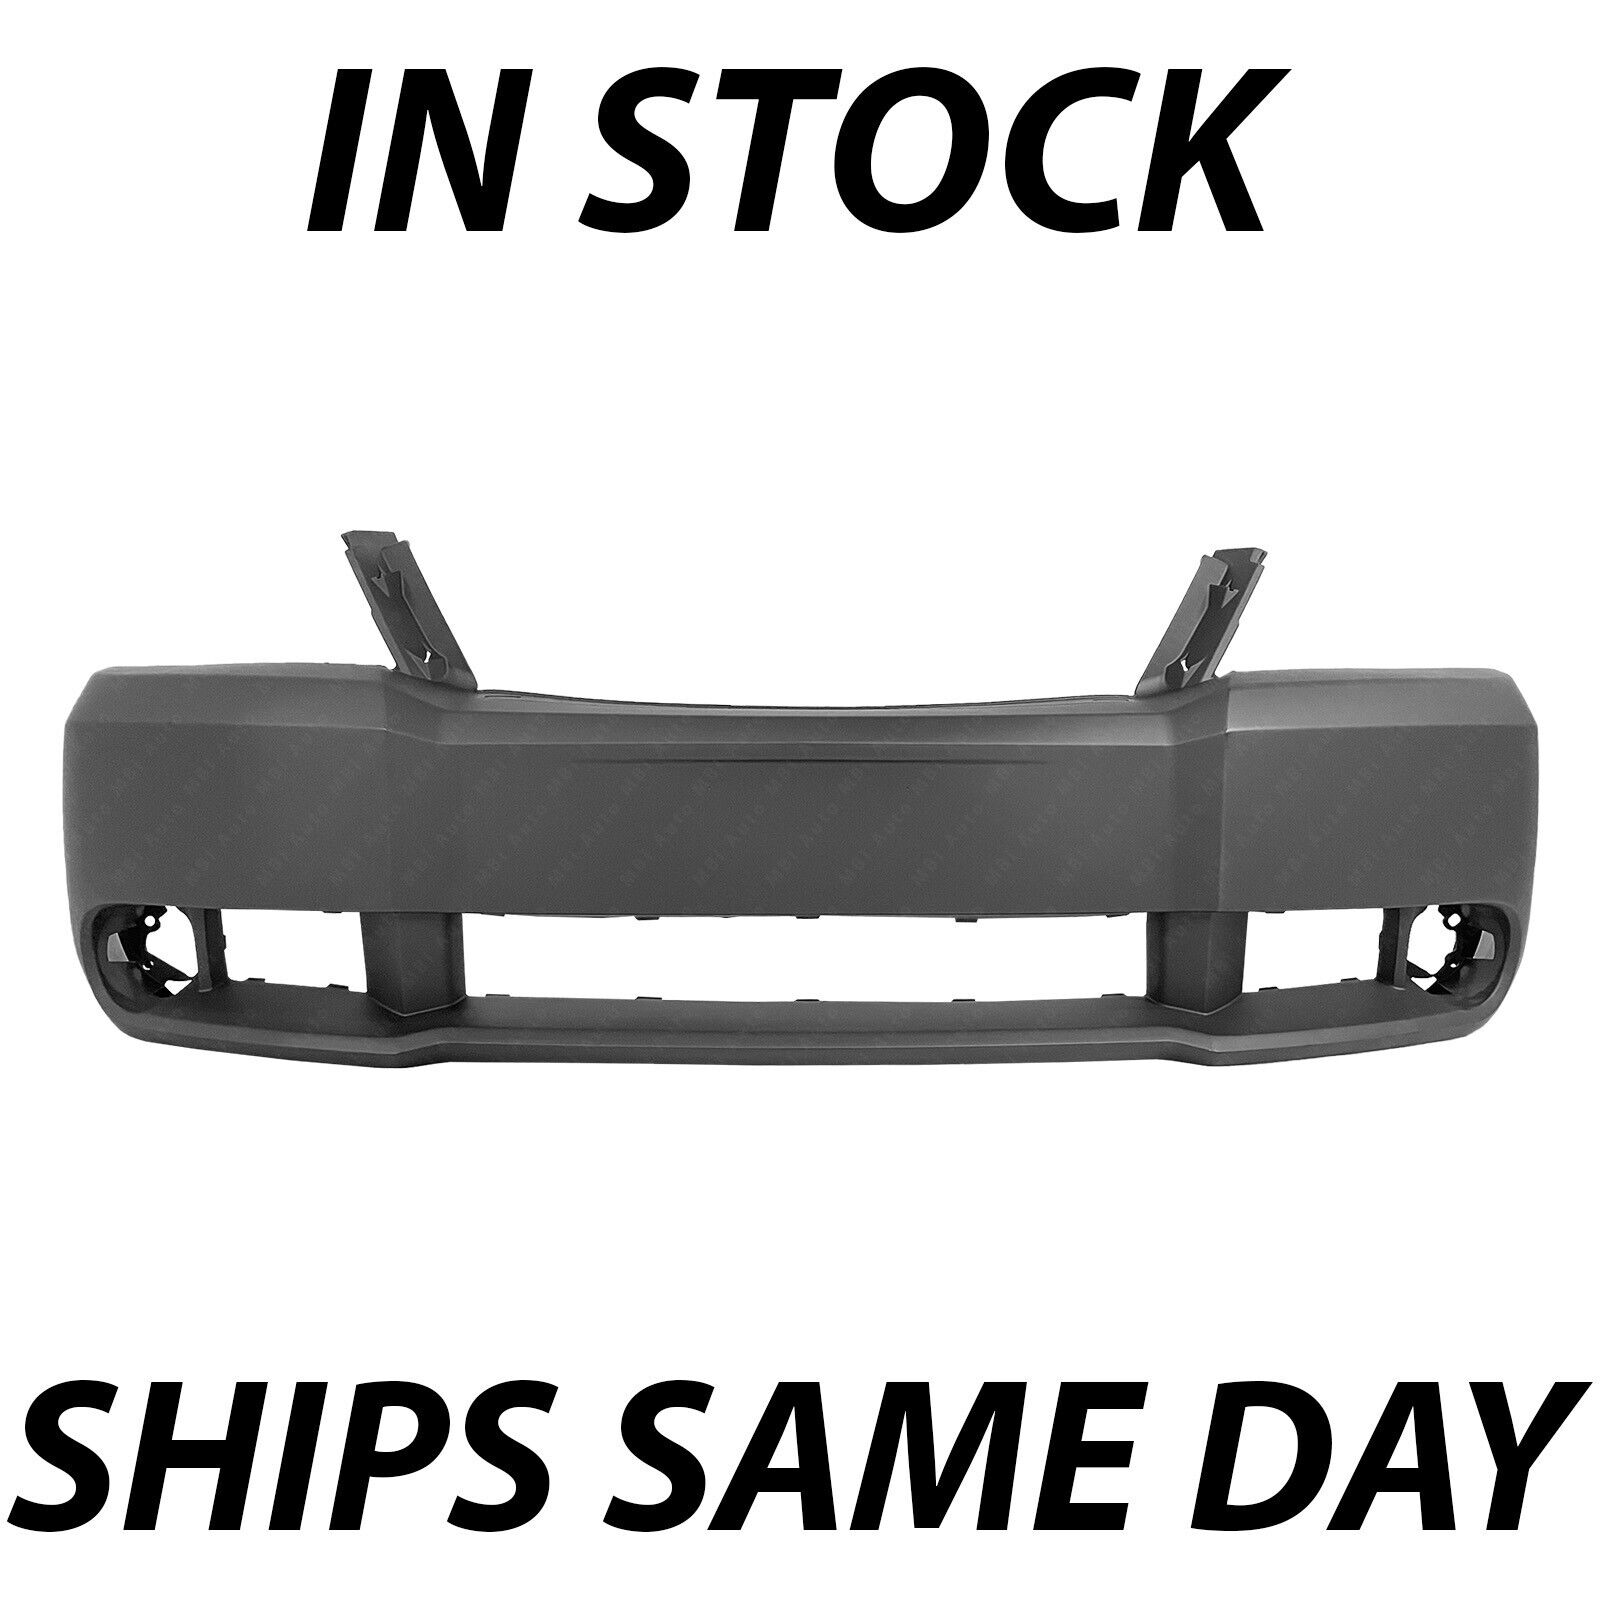 NEW Primered - Front Bumper Cover Replacement for 2008-2010 Dodge Avenger W/ Fog